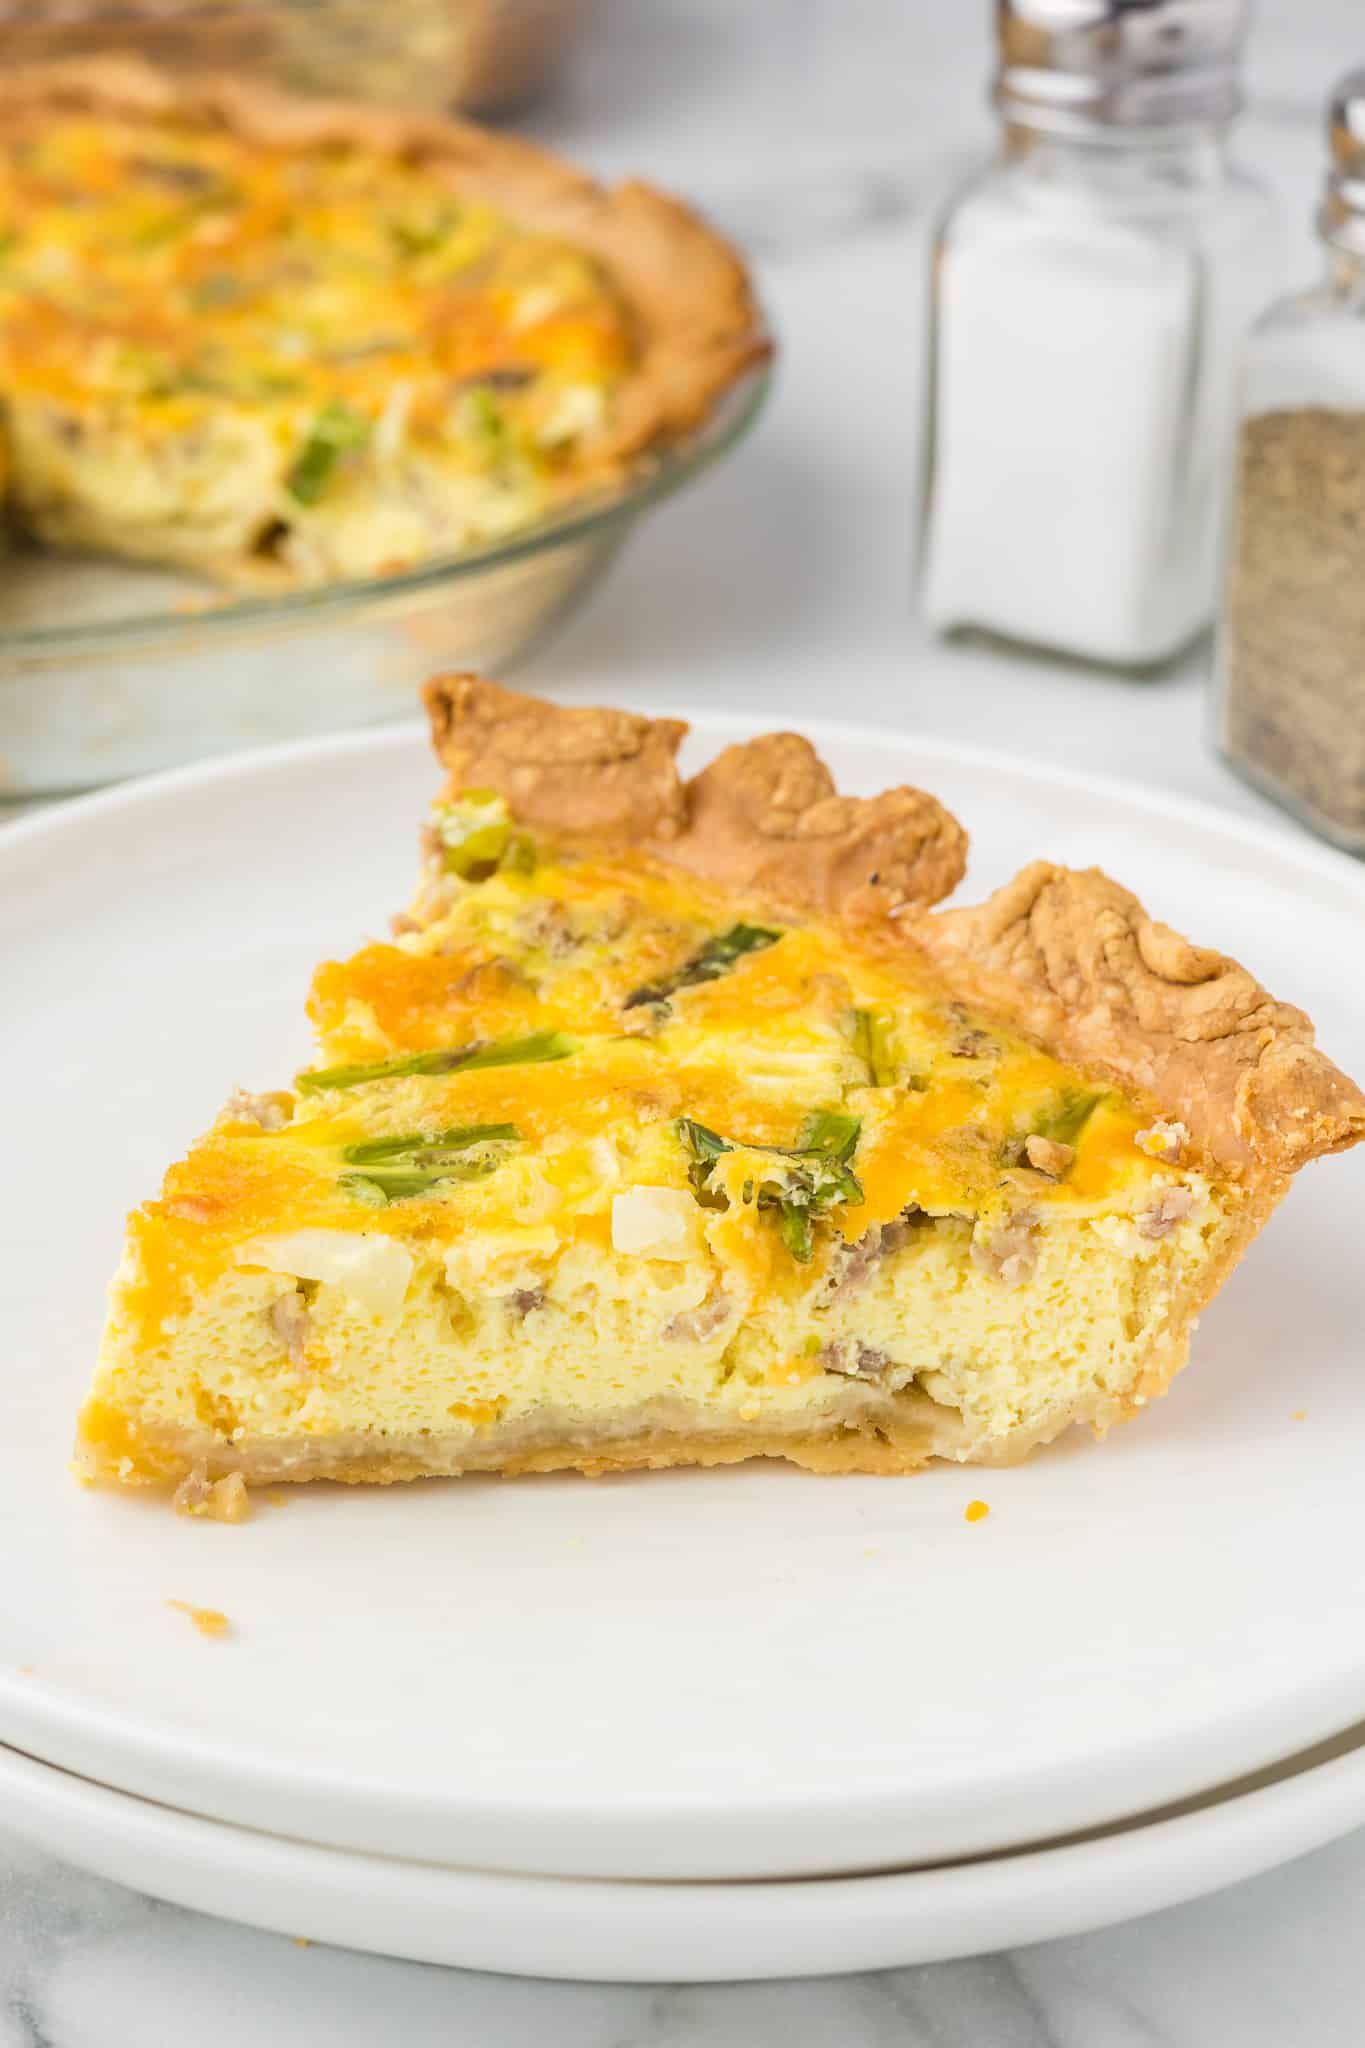 Sausage and asparagus quiche on a white plate.